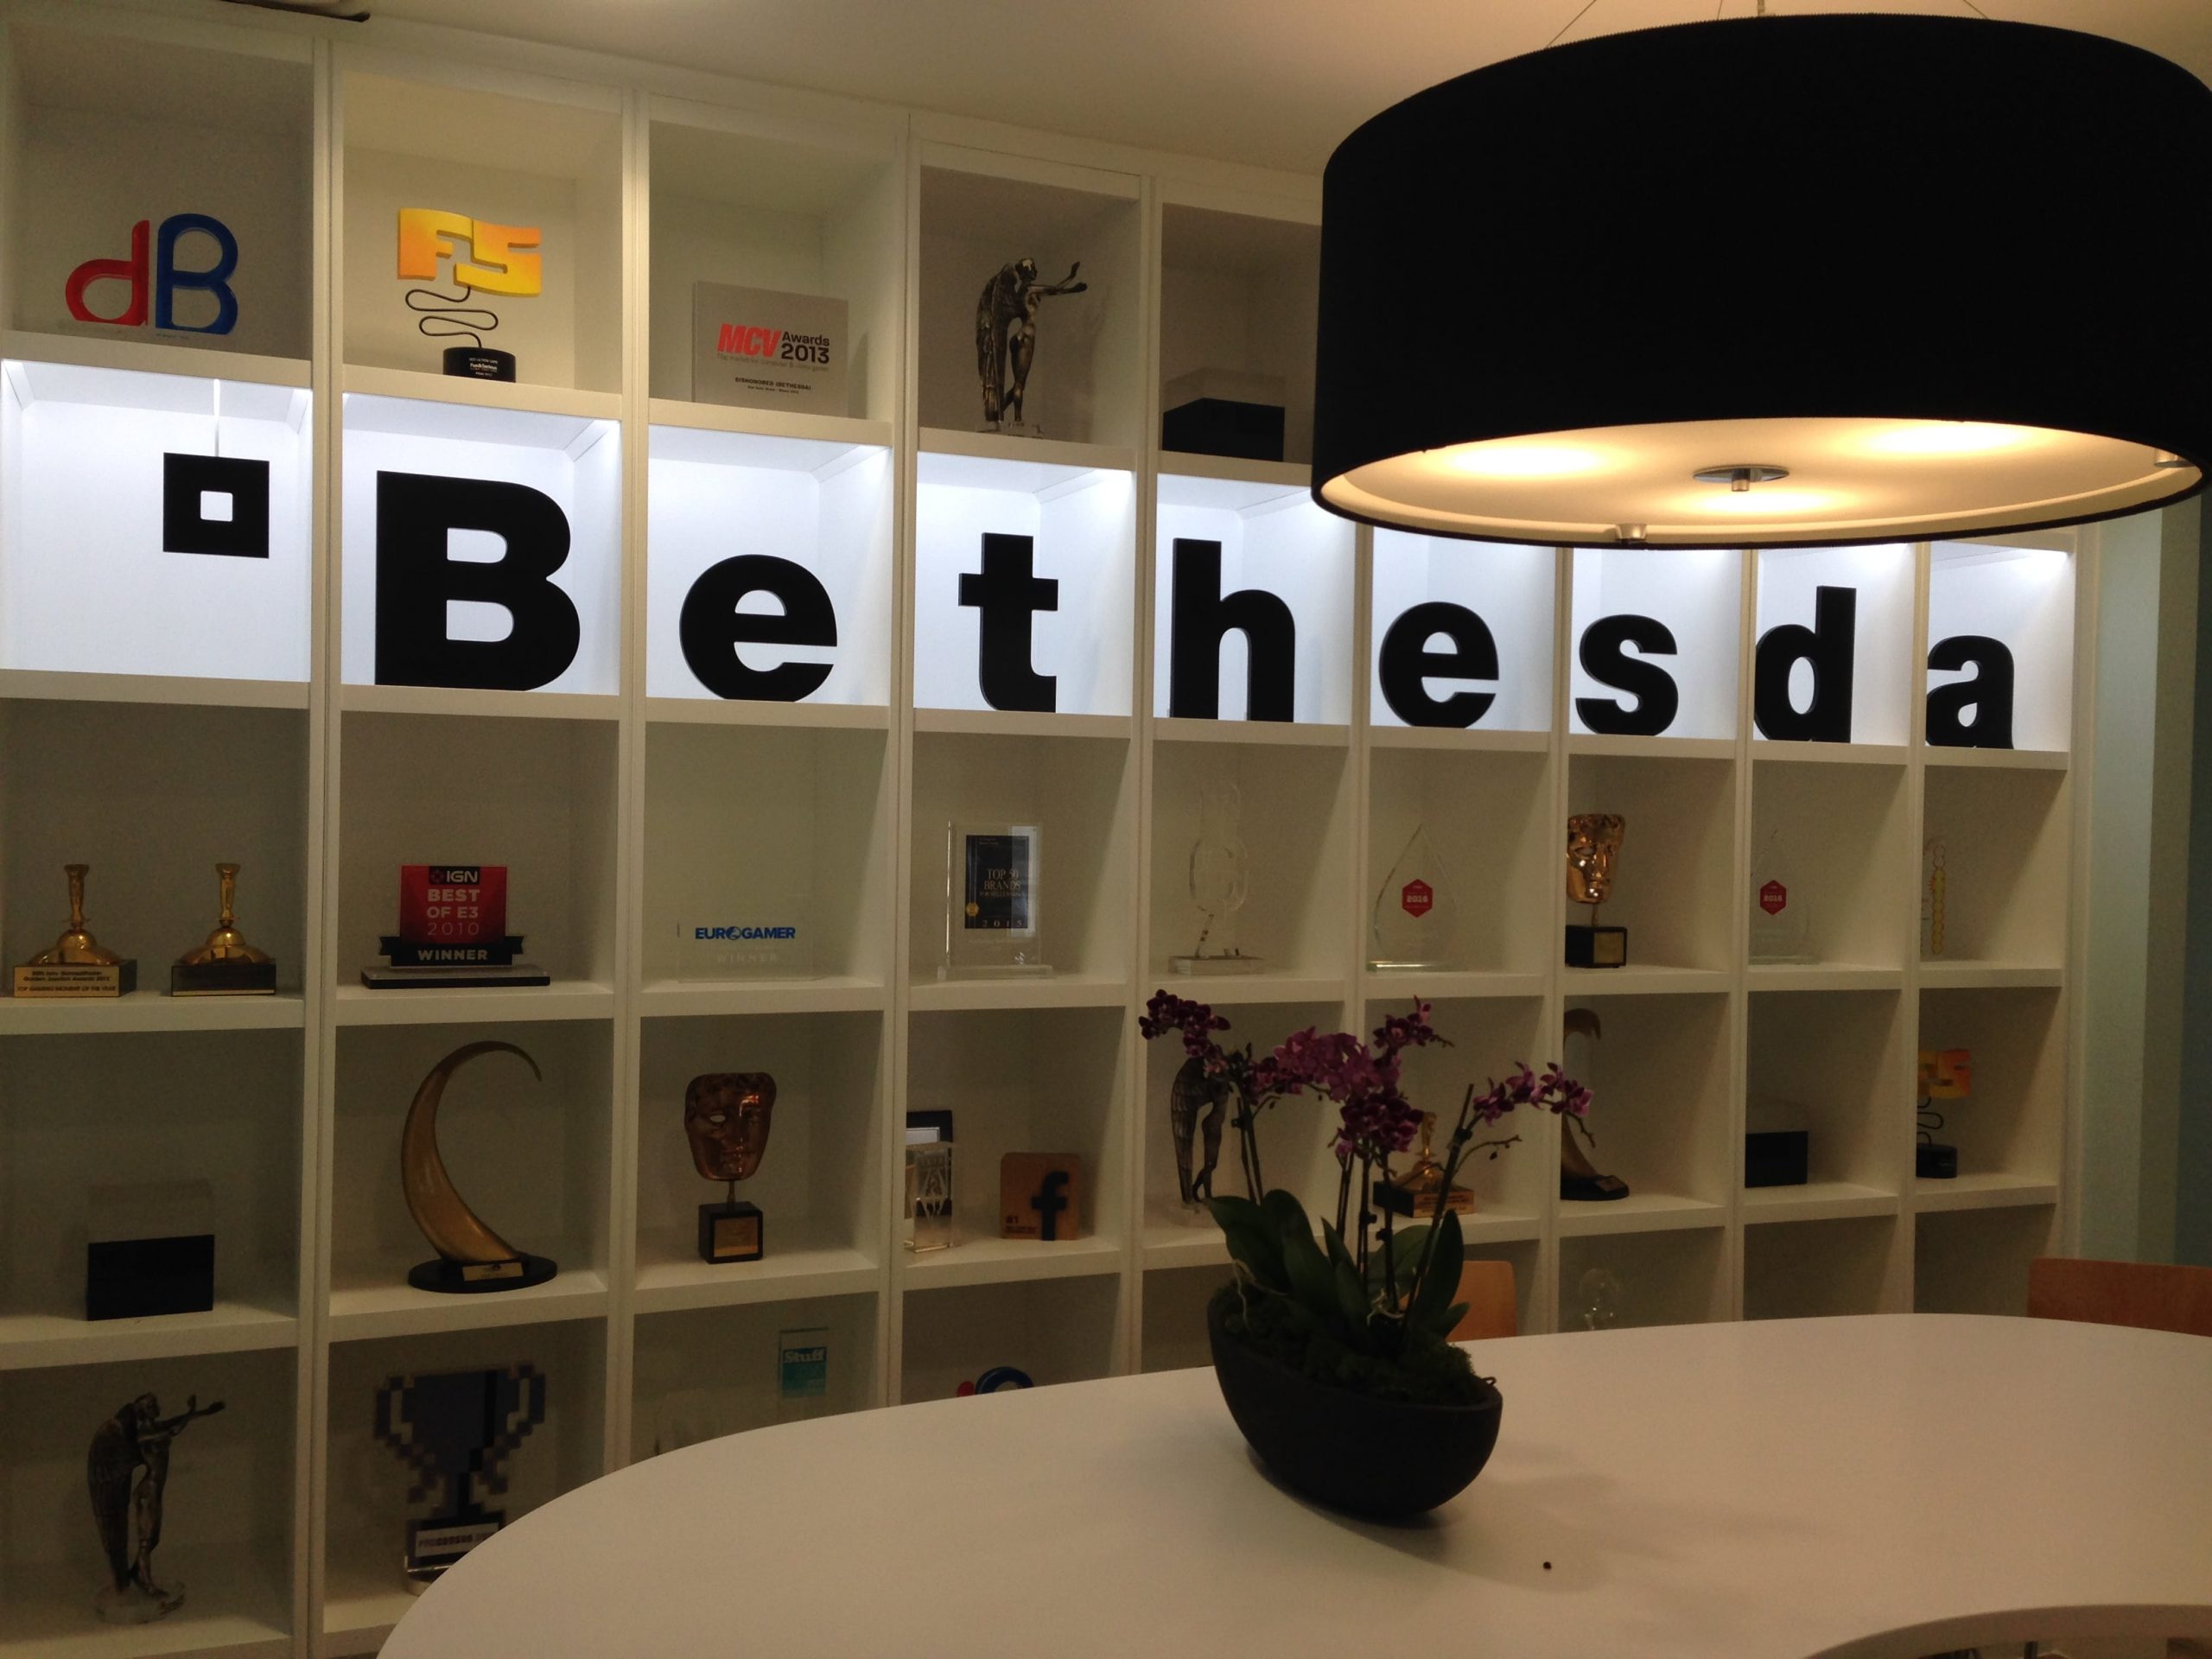 BETHESDA-architectural letters